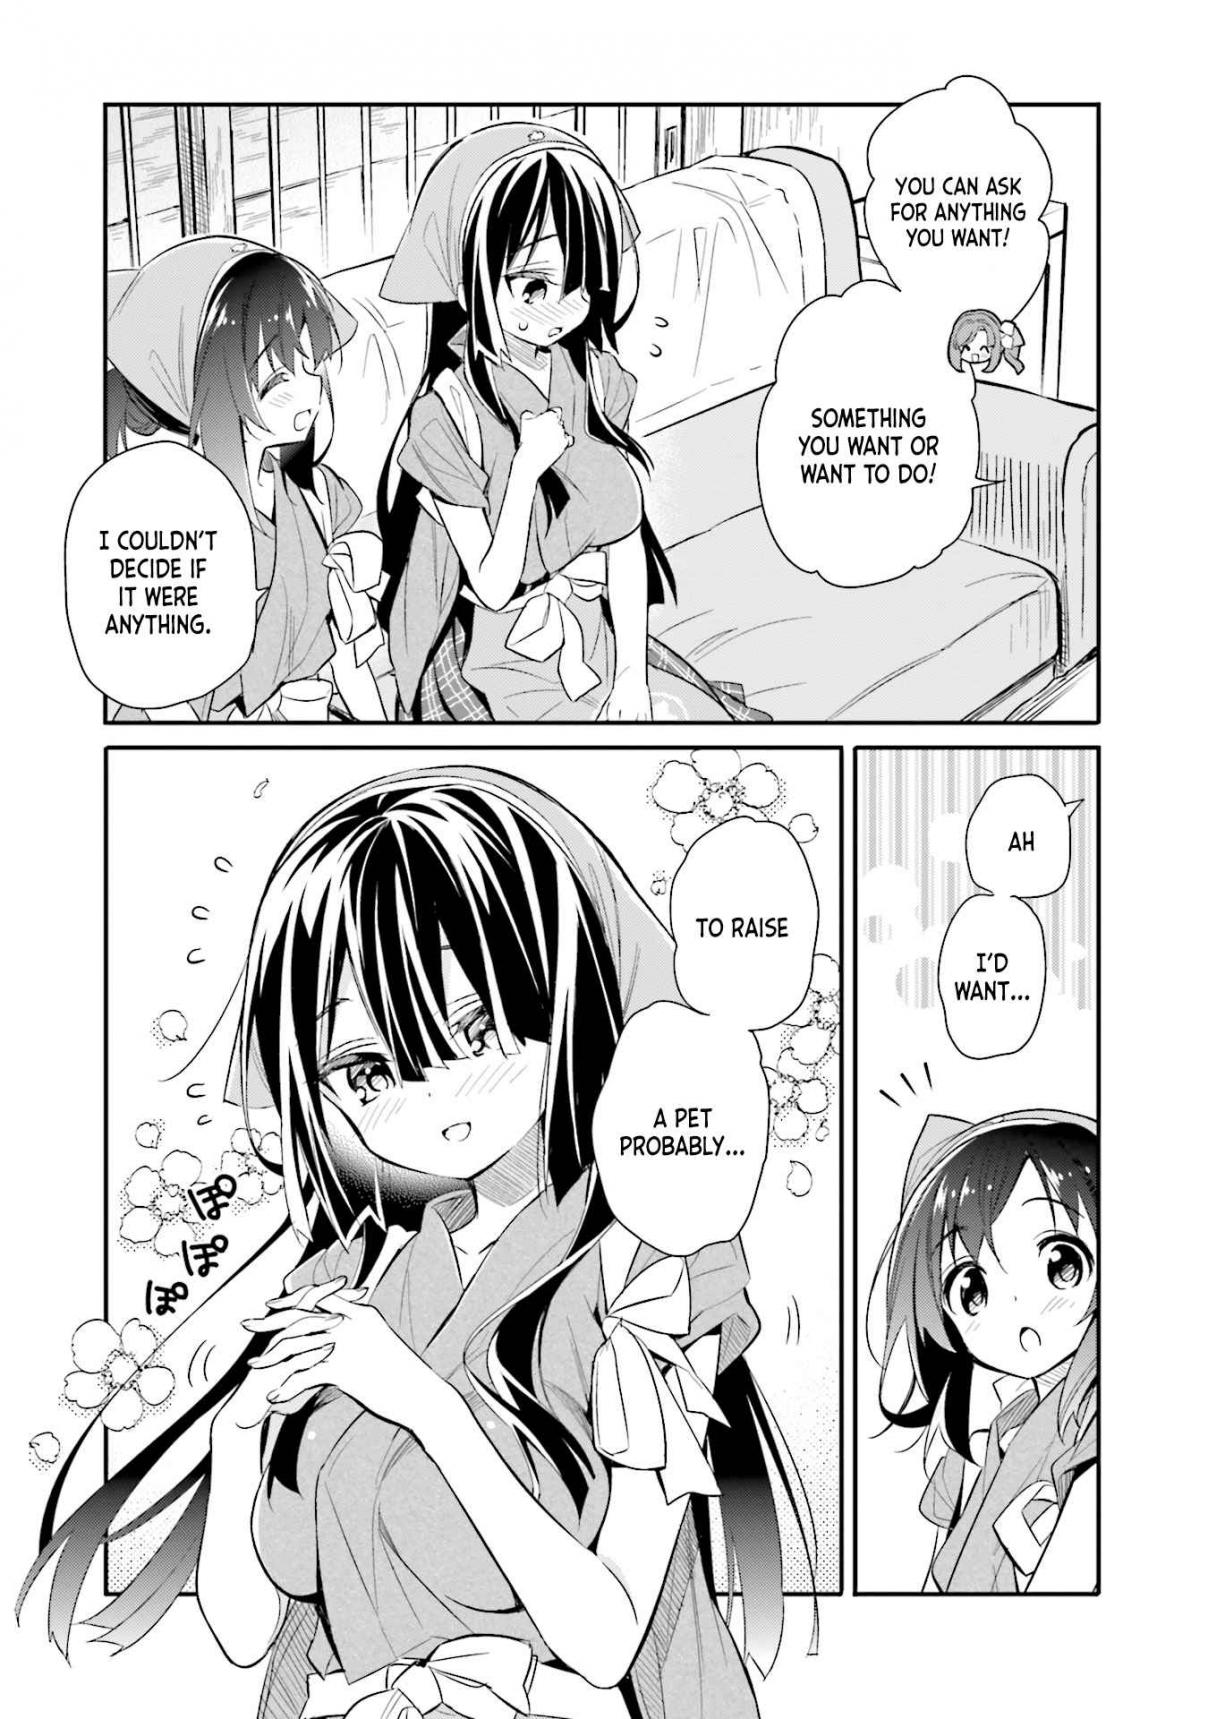 Chotto Ippai! Vol. 2 Ch. 11 I want to ask you something